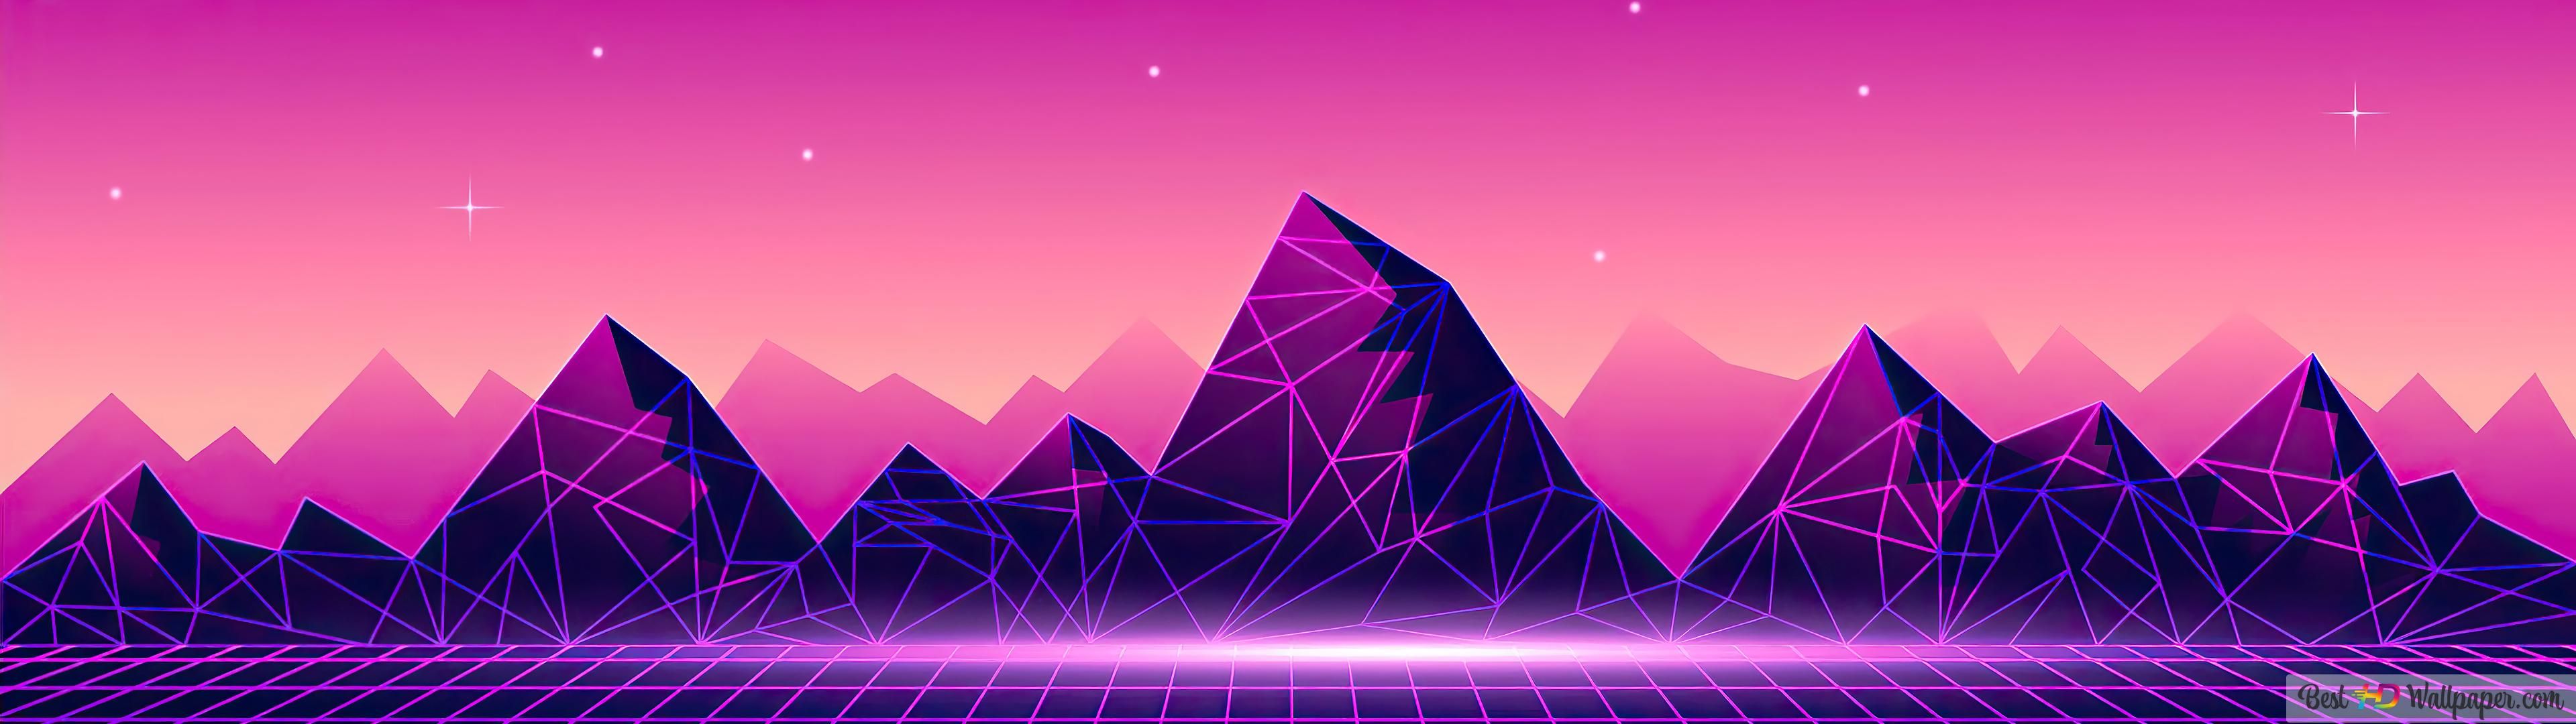 Synthwave Mountain Night 4K wallpaper download